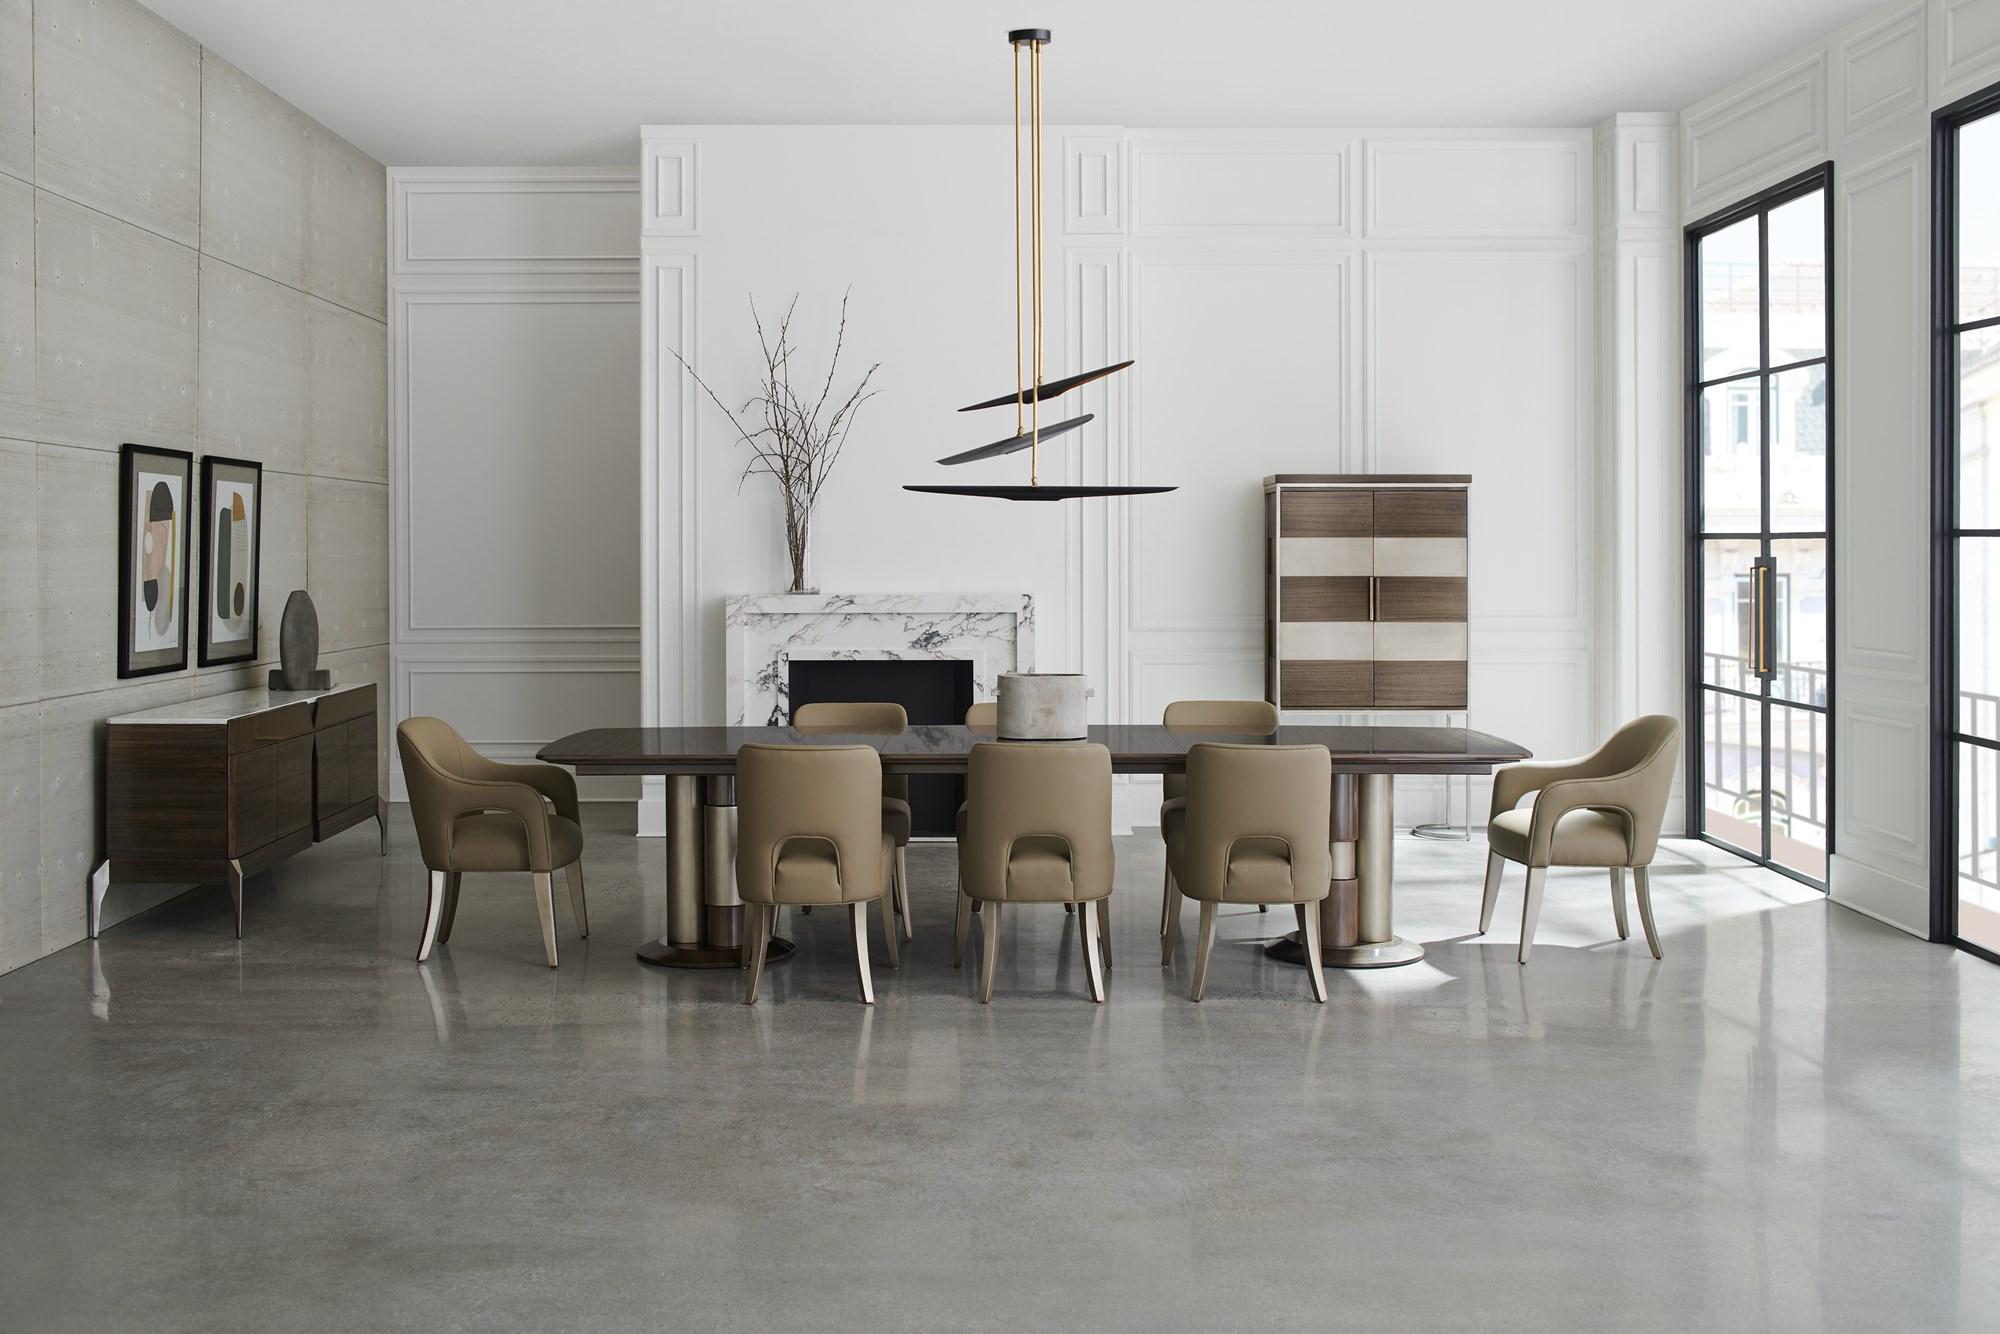 Modern Dining Table Set LA MODA DINING TABLE M132-421-201-Set-9 in Sepia Eco Leather